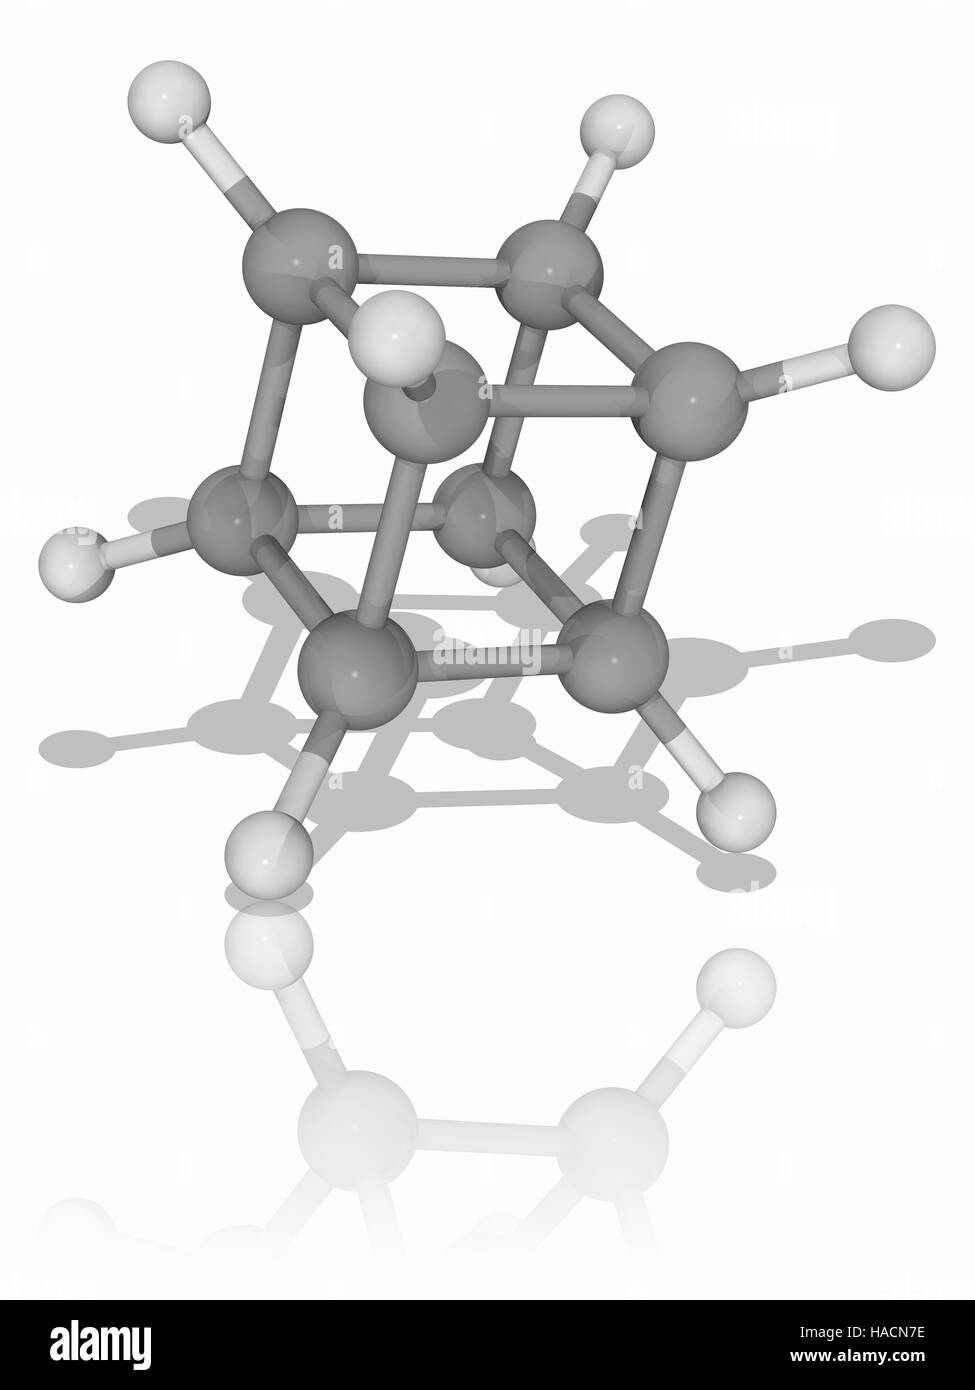 Cubane. Molecular model of the synthetic hydrocarbon cubane (C8.H8). This is a prismane, a hydrocarbon that forms a prism-like polyhedra, in this case a cube, one of the Platonic solids. Such molecules are engineered for their potential uses in medicine and nanotechnology. Atoms are represented as spheres and are colour-coded: carbon (grey) and hydrogen (white). Illustration. Stock Photo